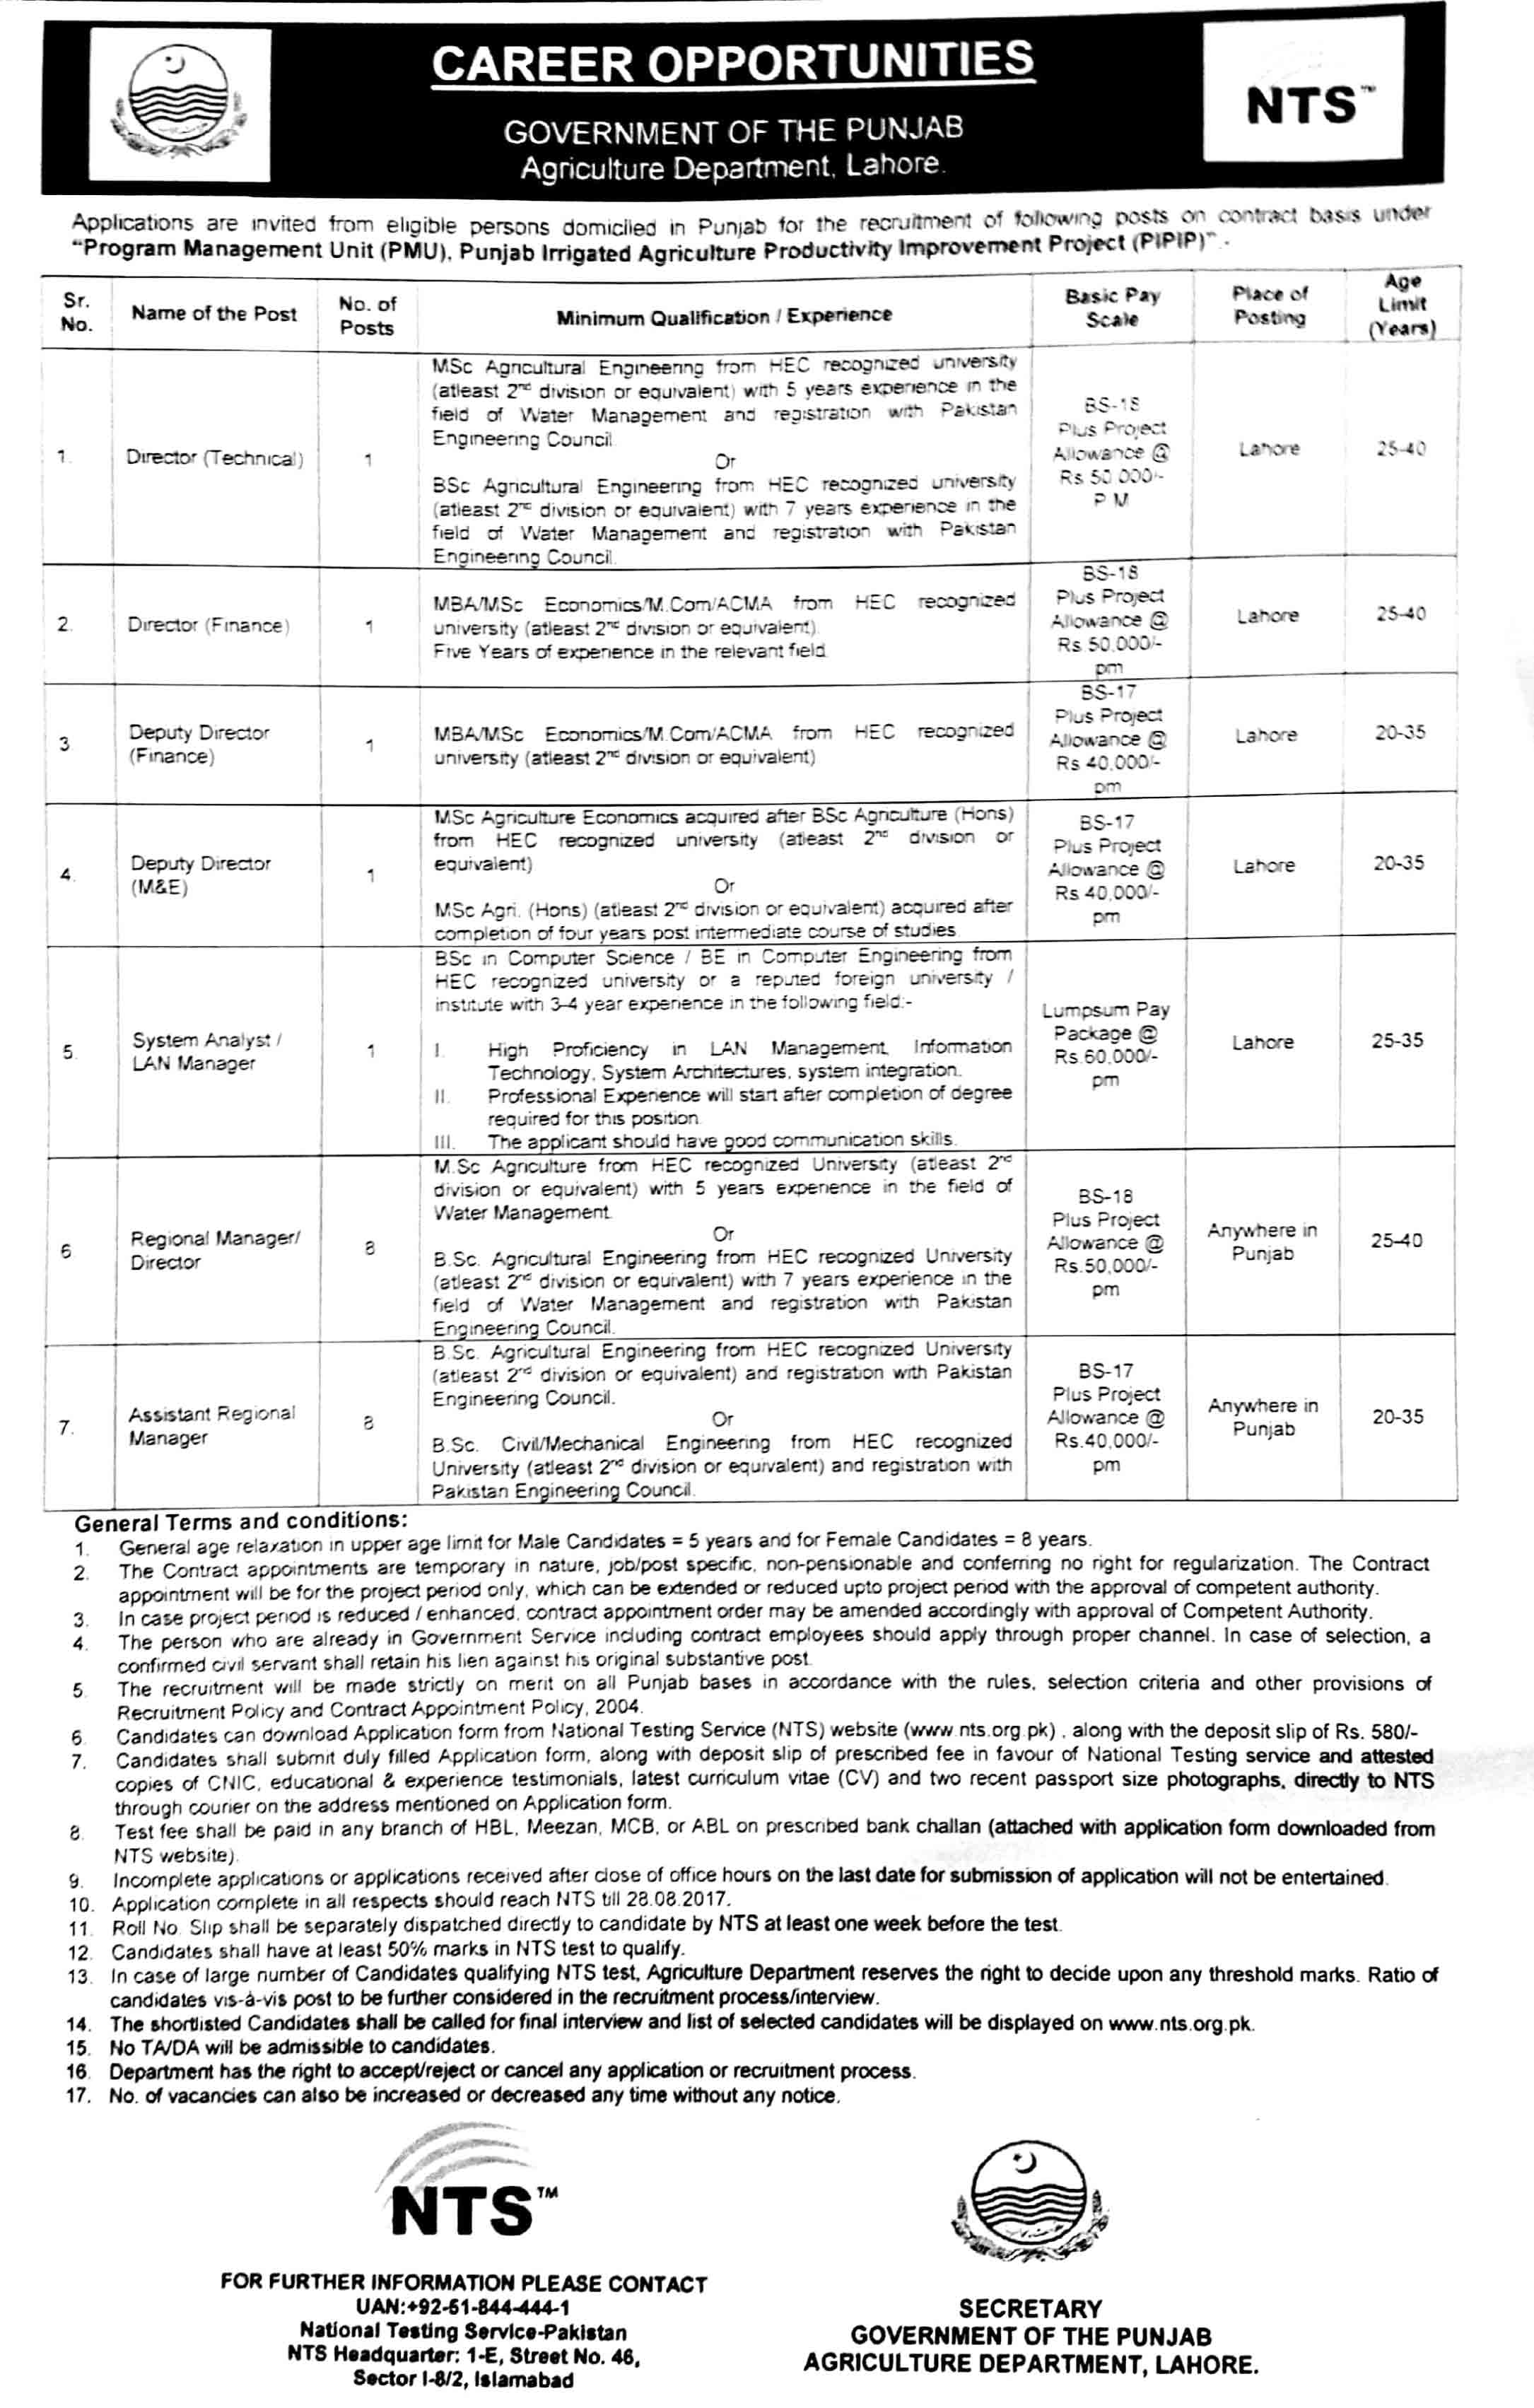 Jobs in Agriculture Department Punjab 2017 NTS Application Form Download